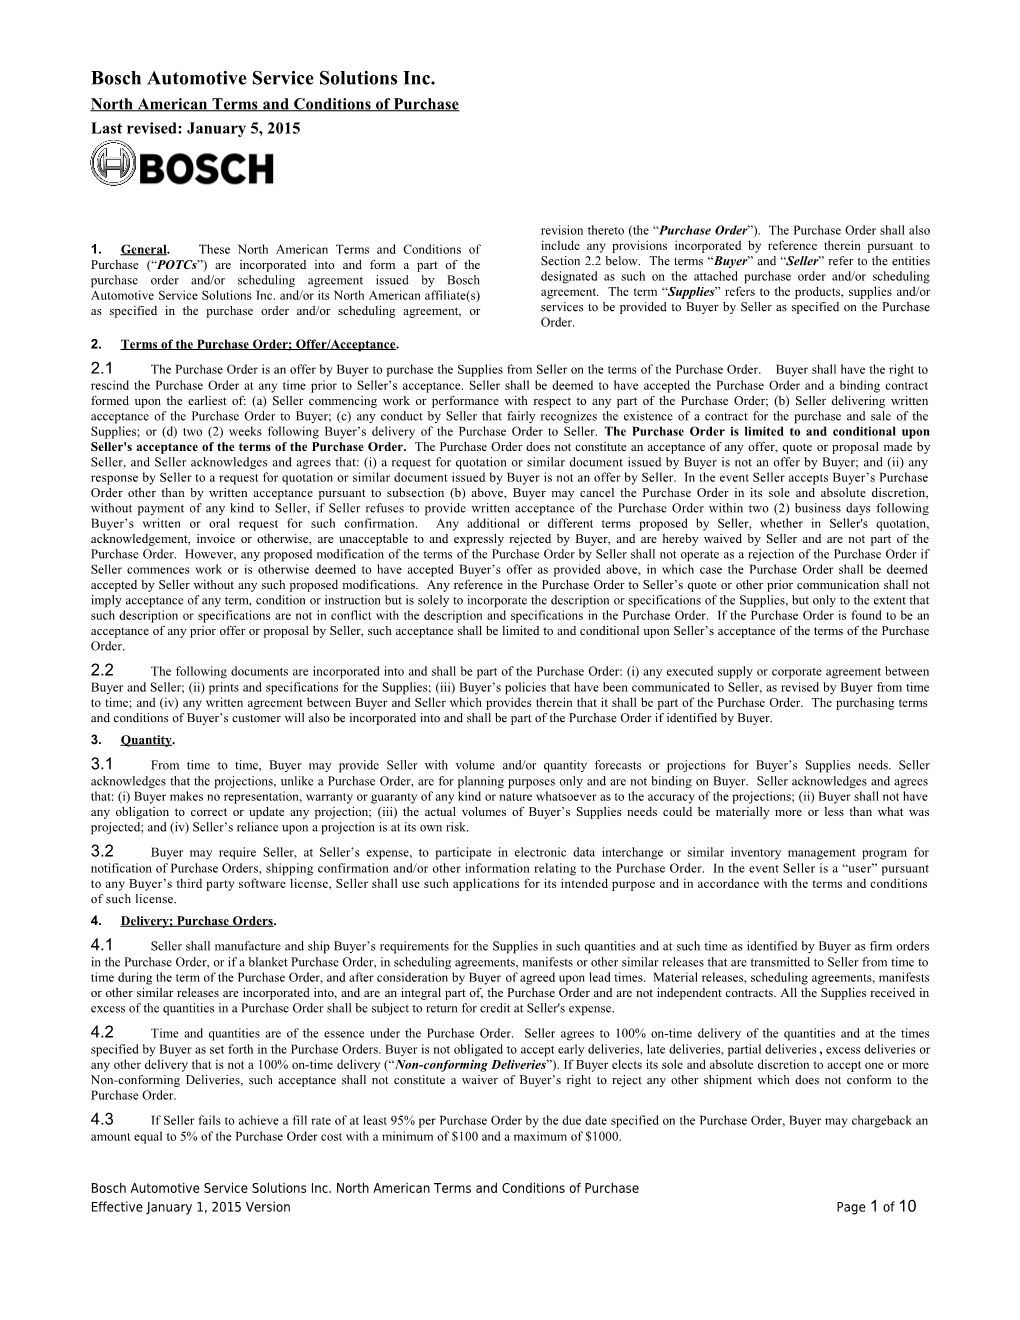 Bosch Automotive Service Solutions Inc. North American Terms and Conditions of Purchase